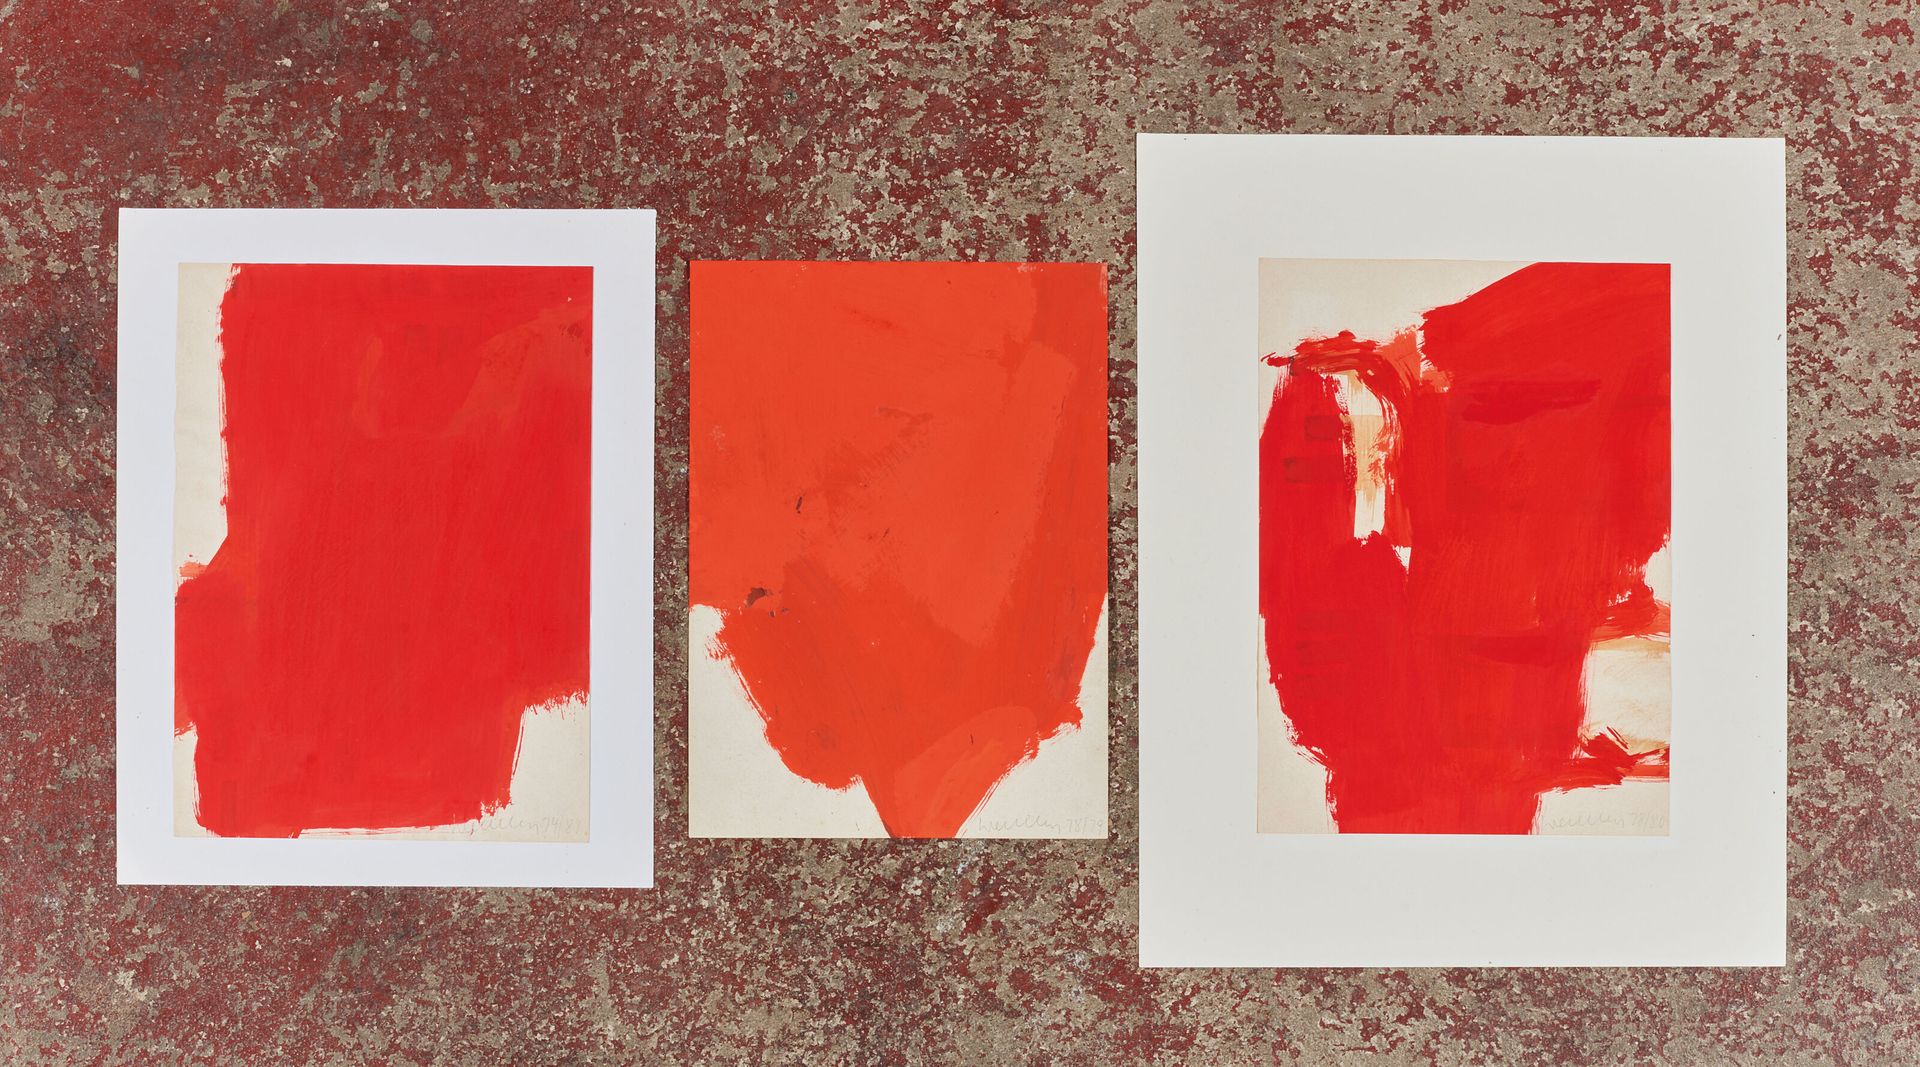 Null Franz Erhard WALTHER (born 1939).
Set of 3 works - 1974-81.
Gouache on pape&hellip;